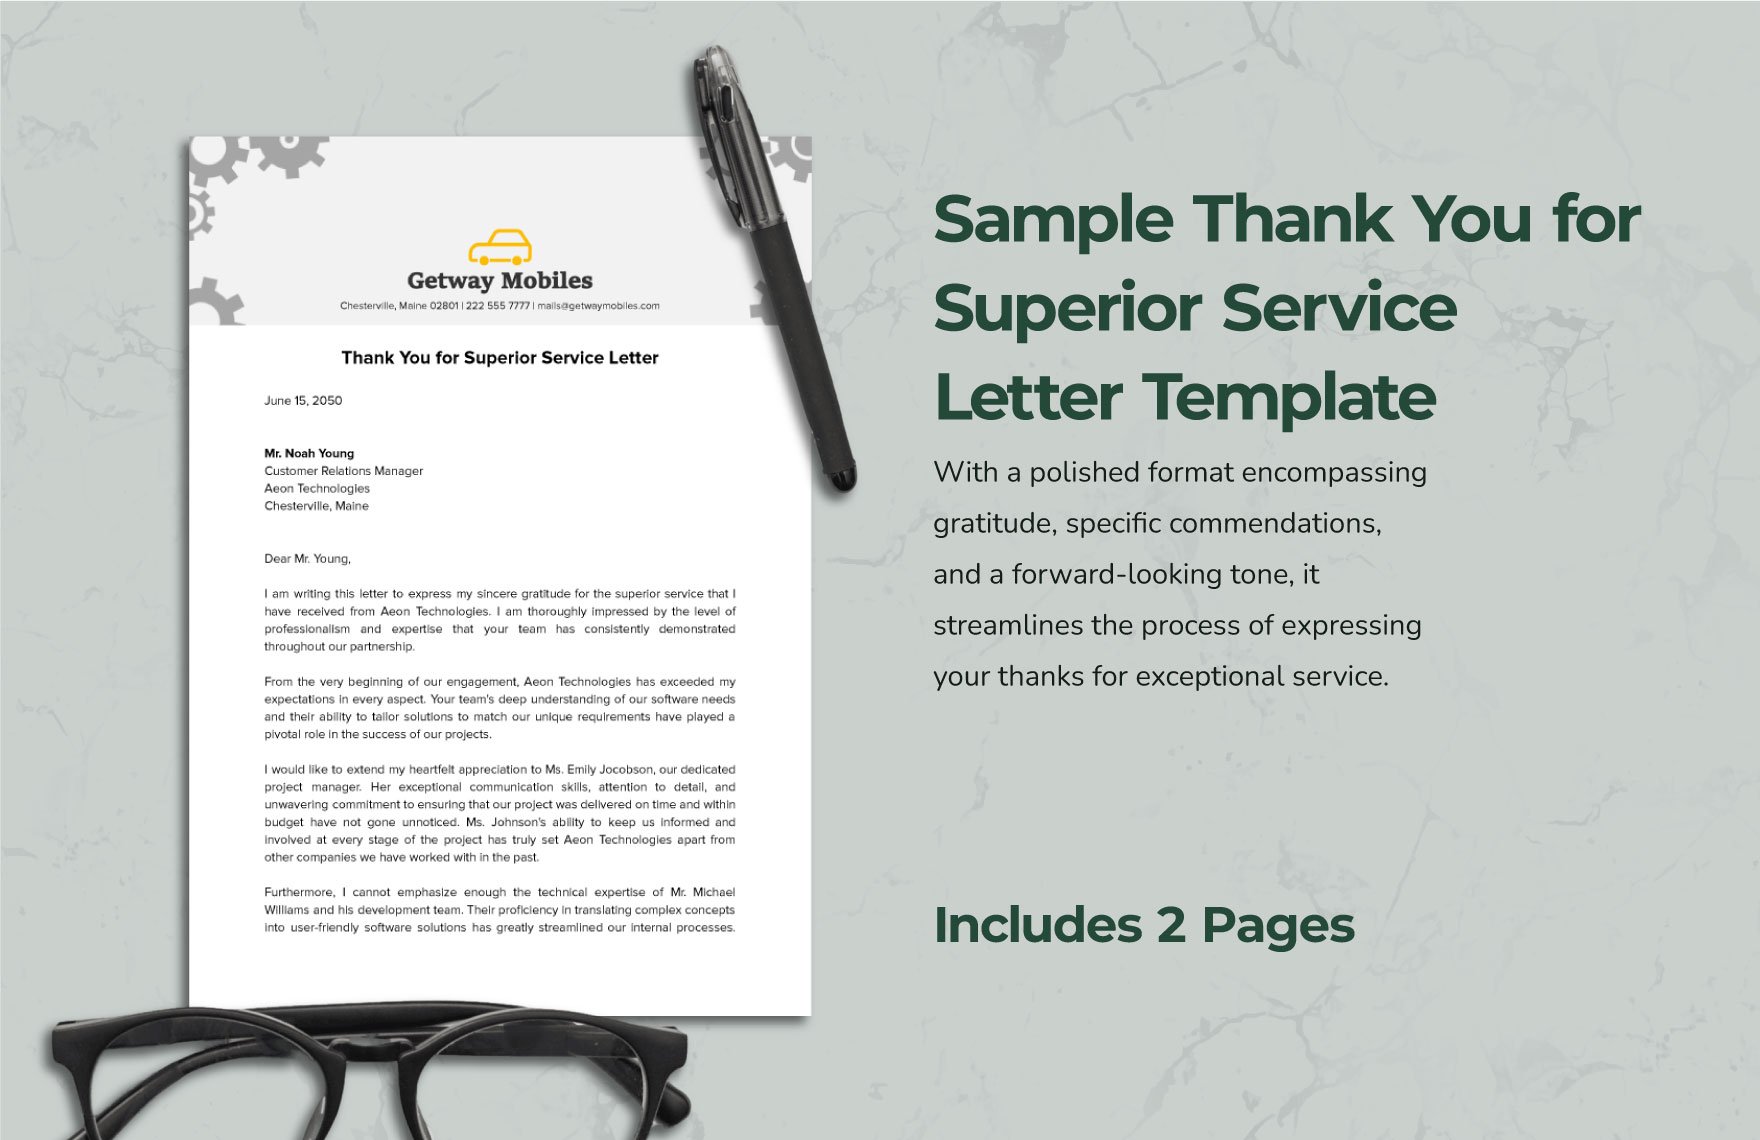 Sample Thank You for Superior Service Letter Template